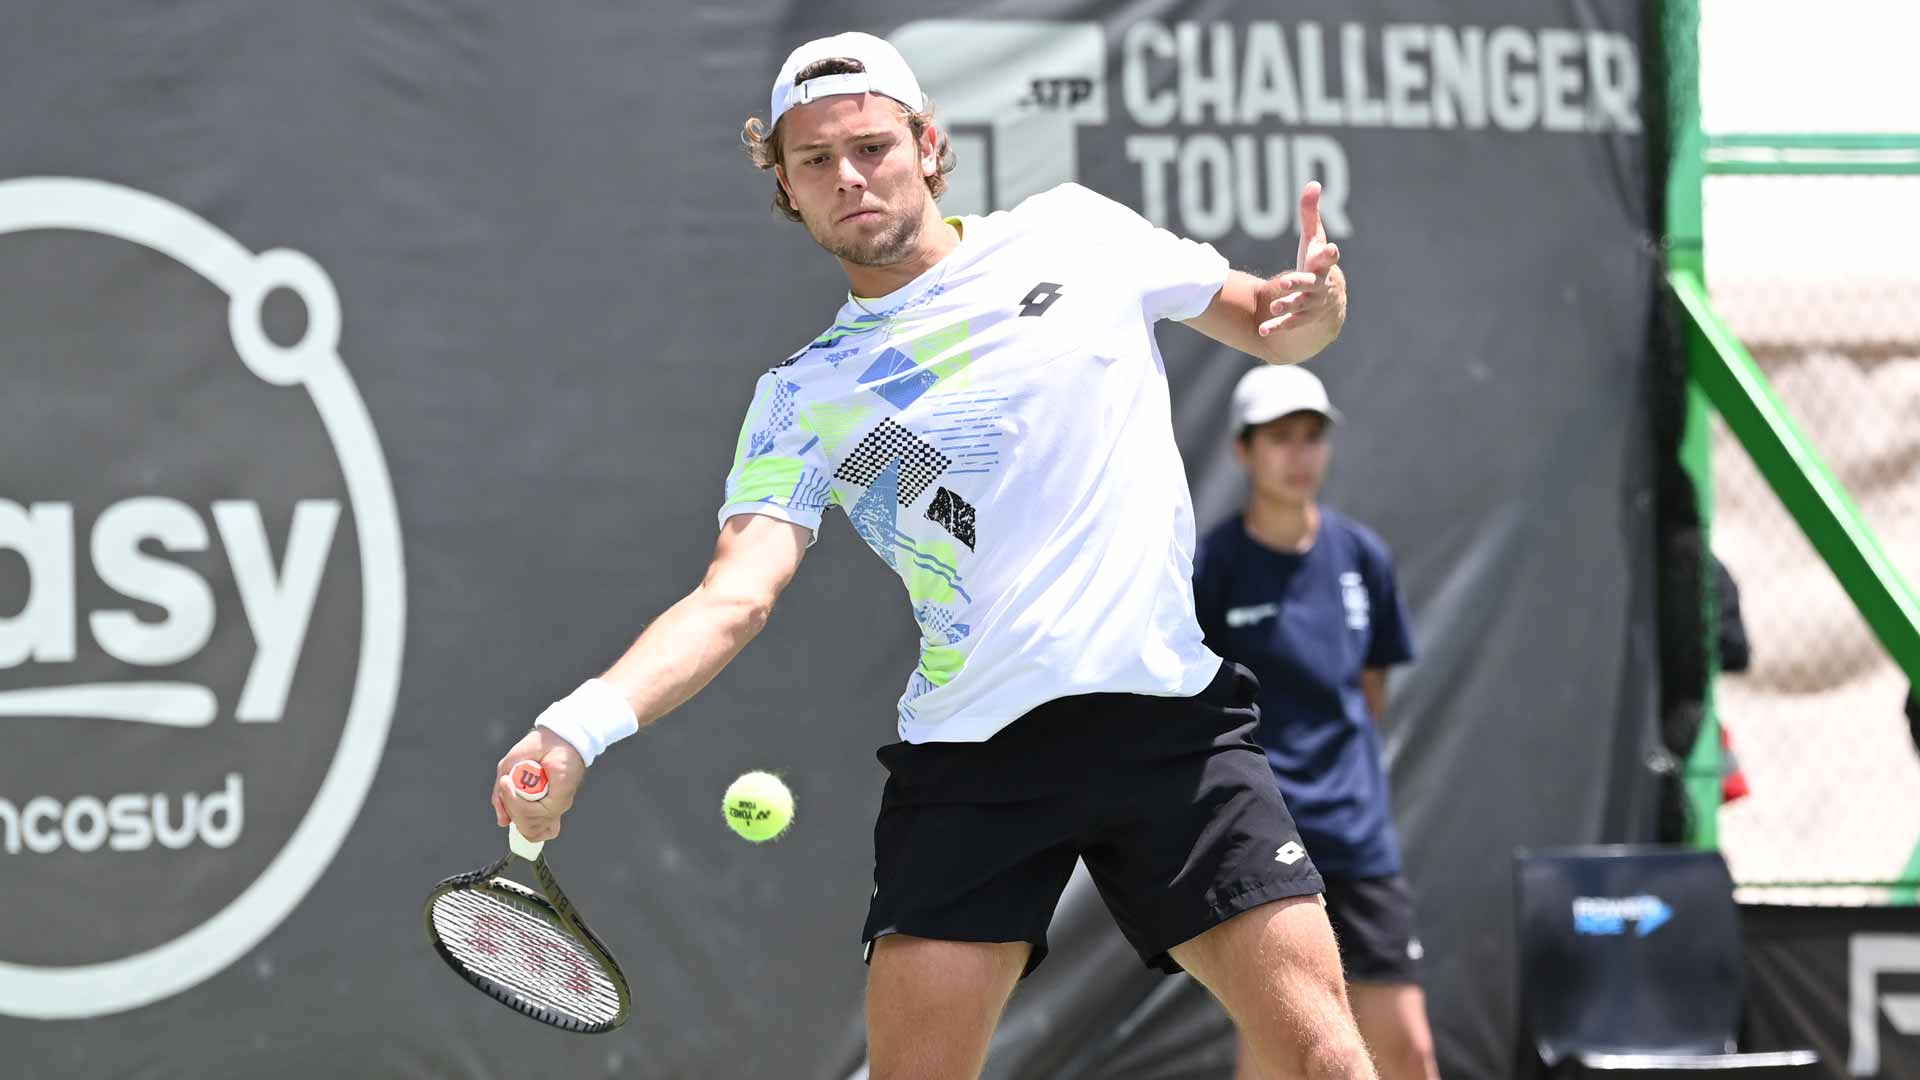 Aleksandar Kovacevic is at a career-high No. 85 in the Pepperstone ATP Rankings.